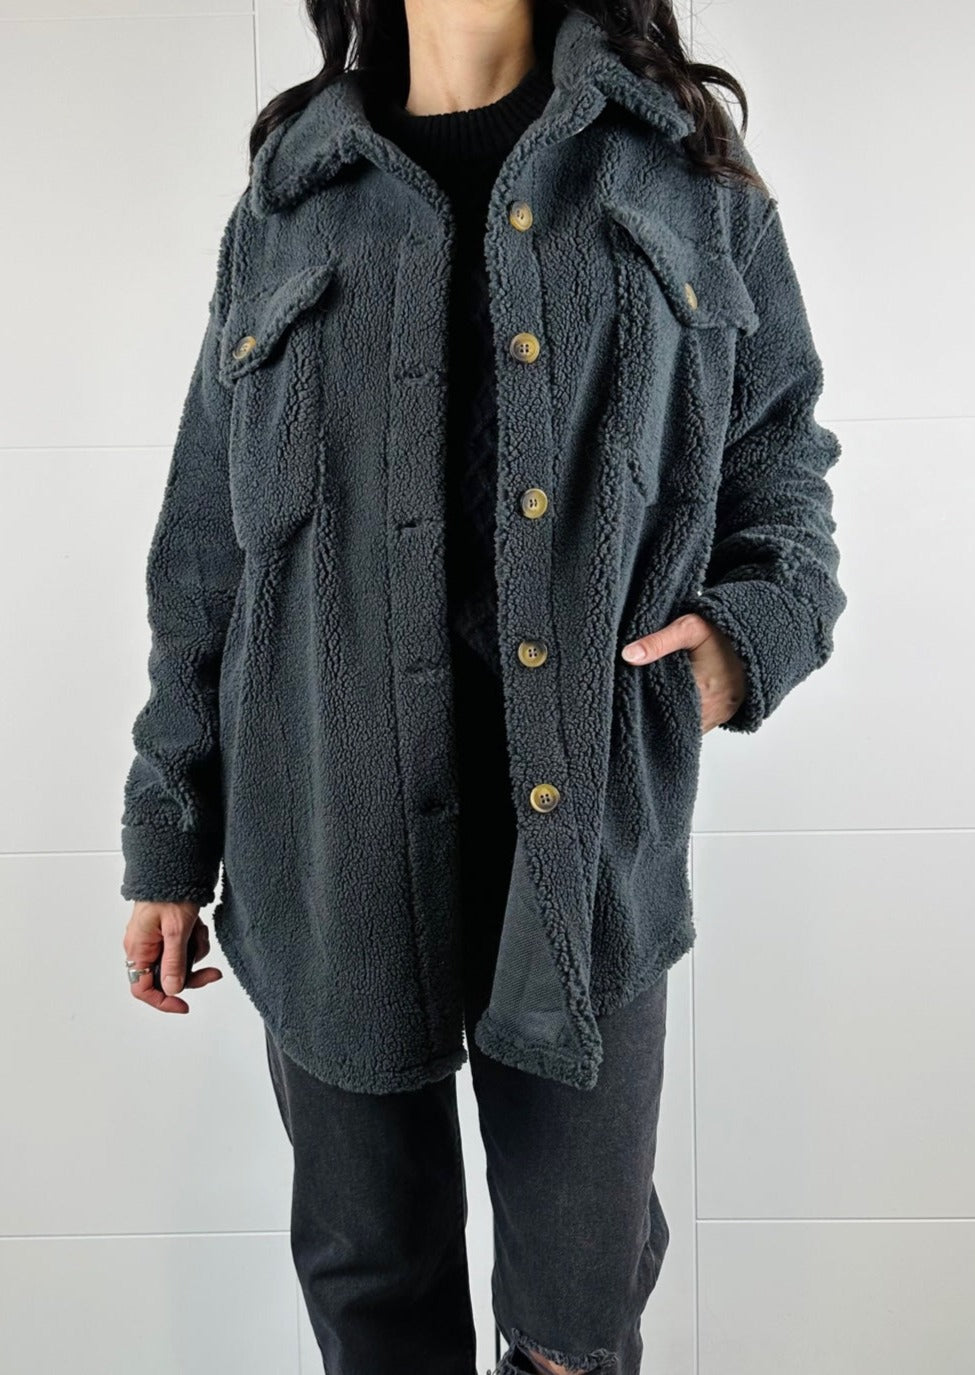 YOUNG & OLSEN The DRYGOODS STORE】/ OMBRE PLAID CHIC JACKET-